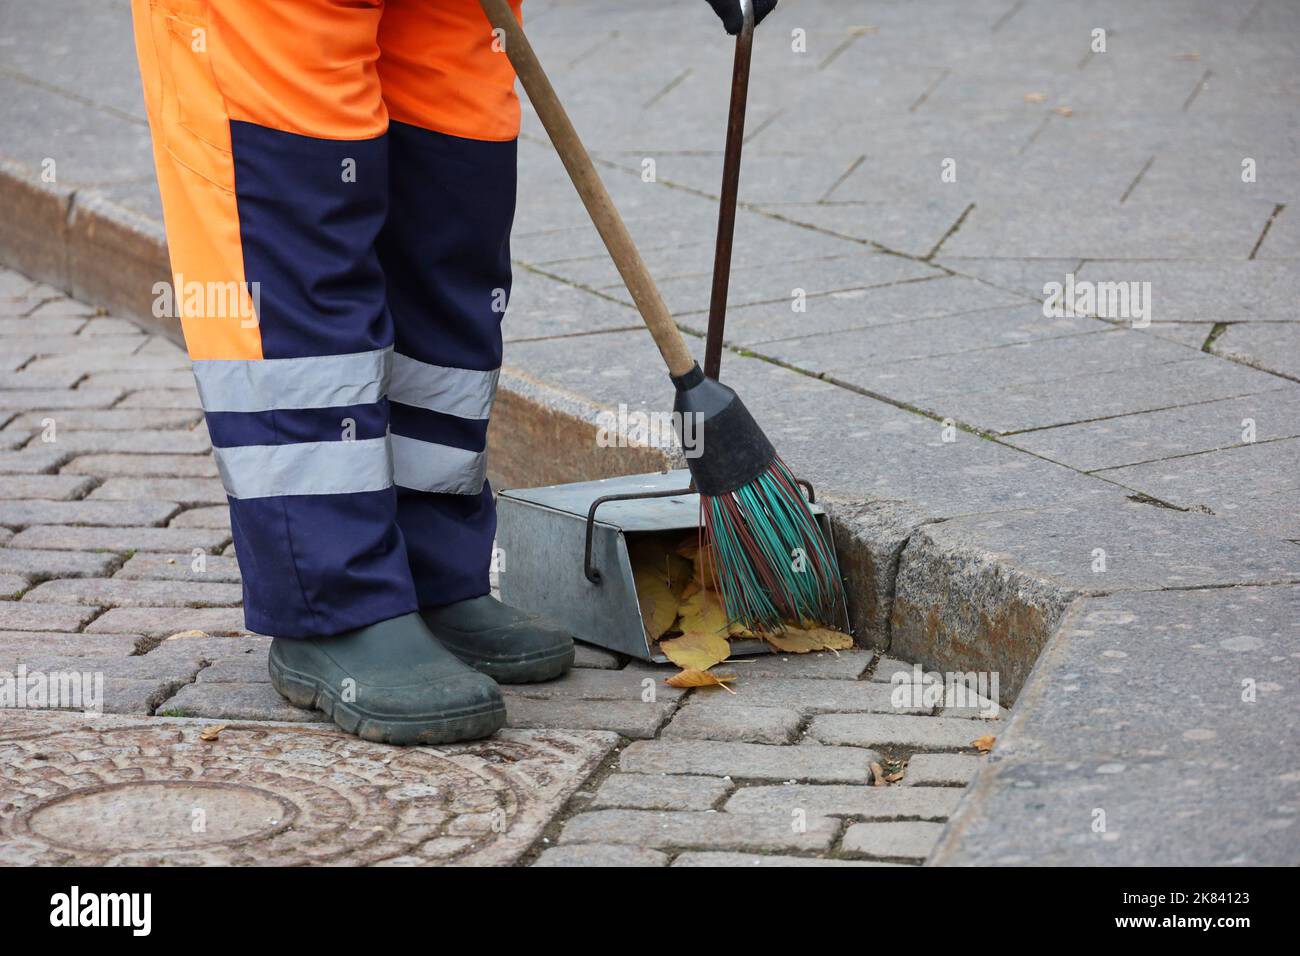 Worker in uniform with a broom clean the sidewalk, collects fallen leaves in a dustpan. Street cleaning in autumn city Stock Photo